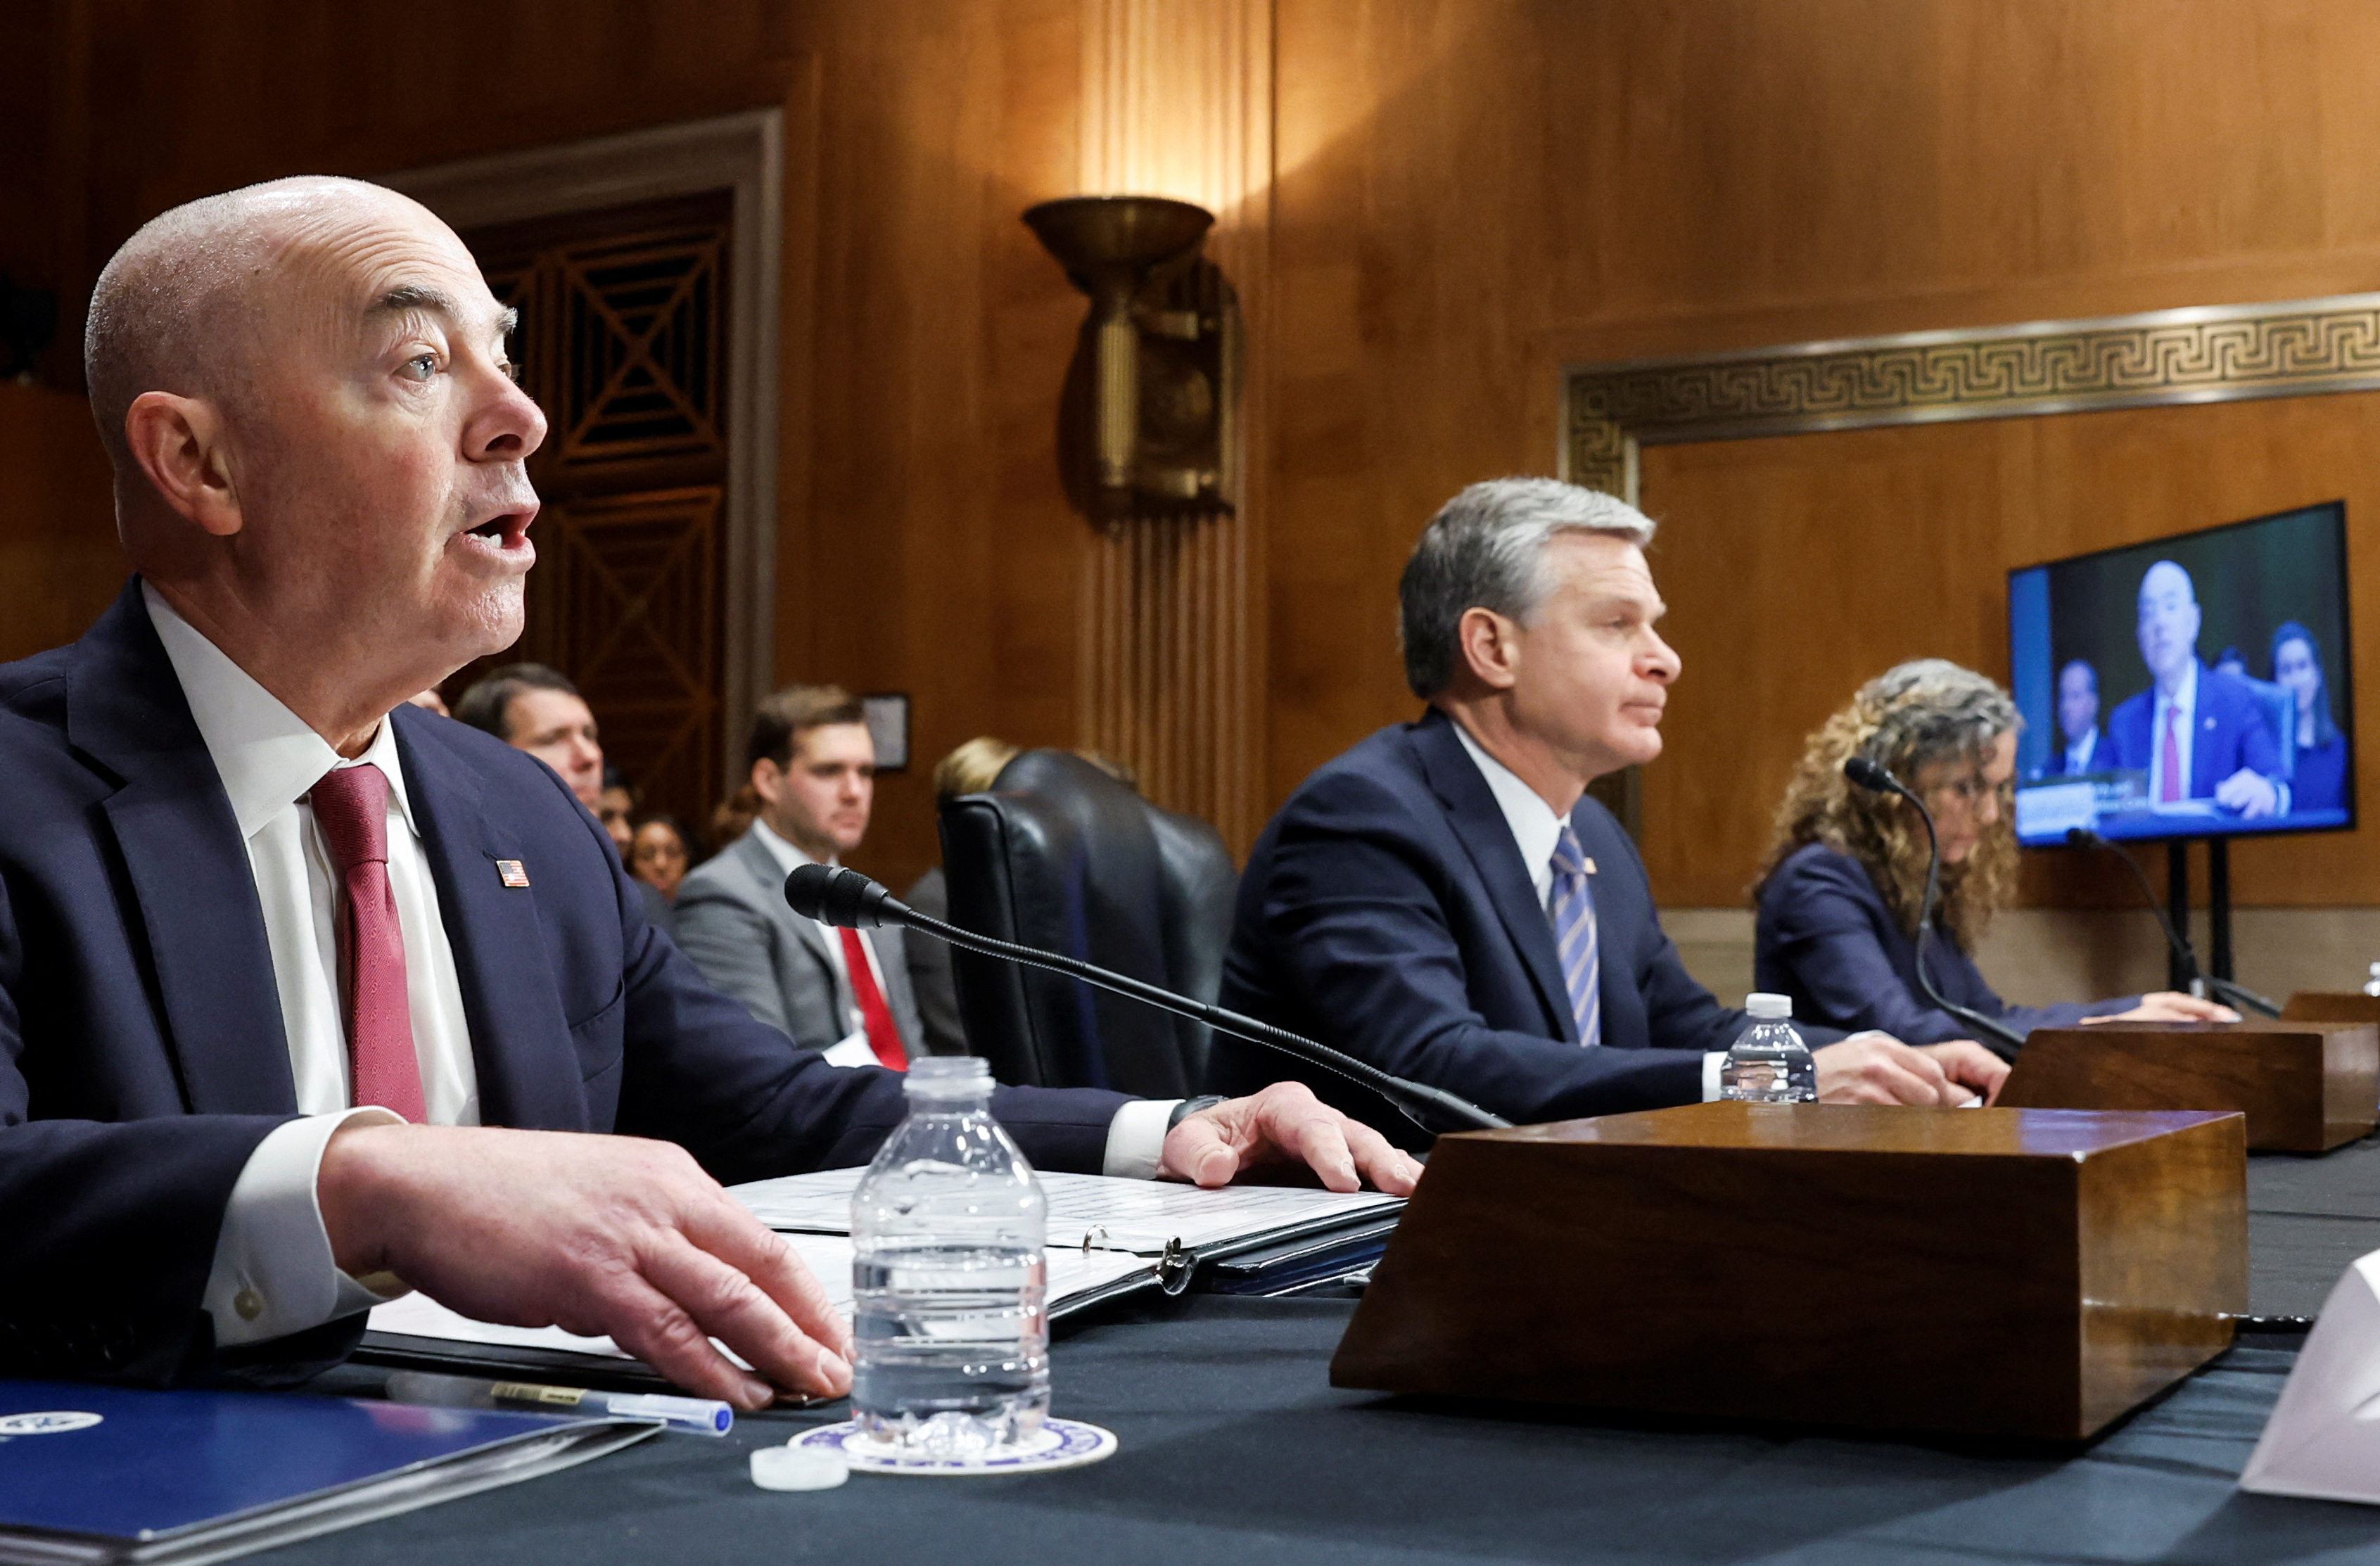 The Senate Homeland Security and Governmental Affairs Committee holds a hearing on threats against the United States at the Capitol in Washington